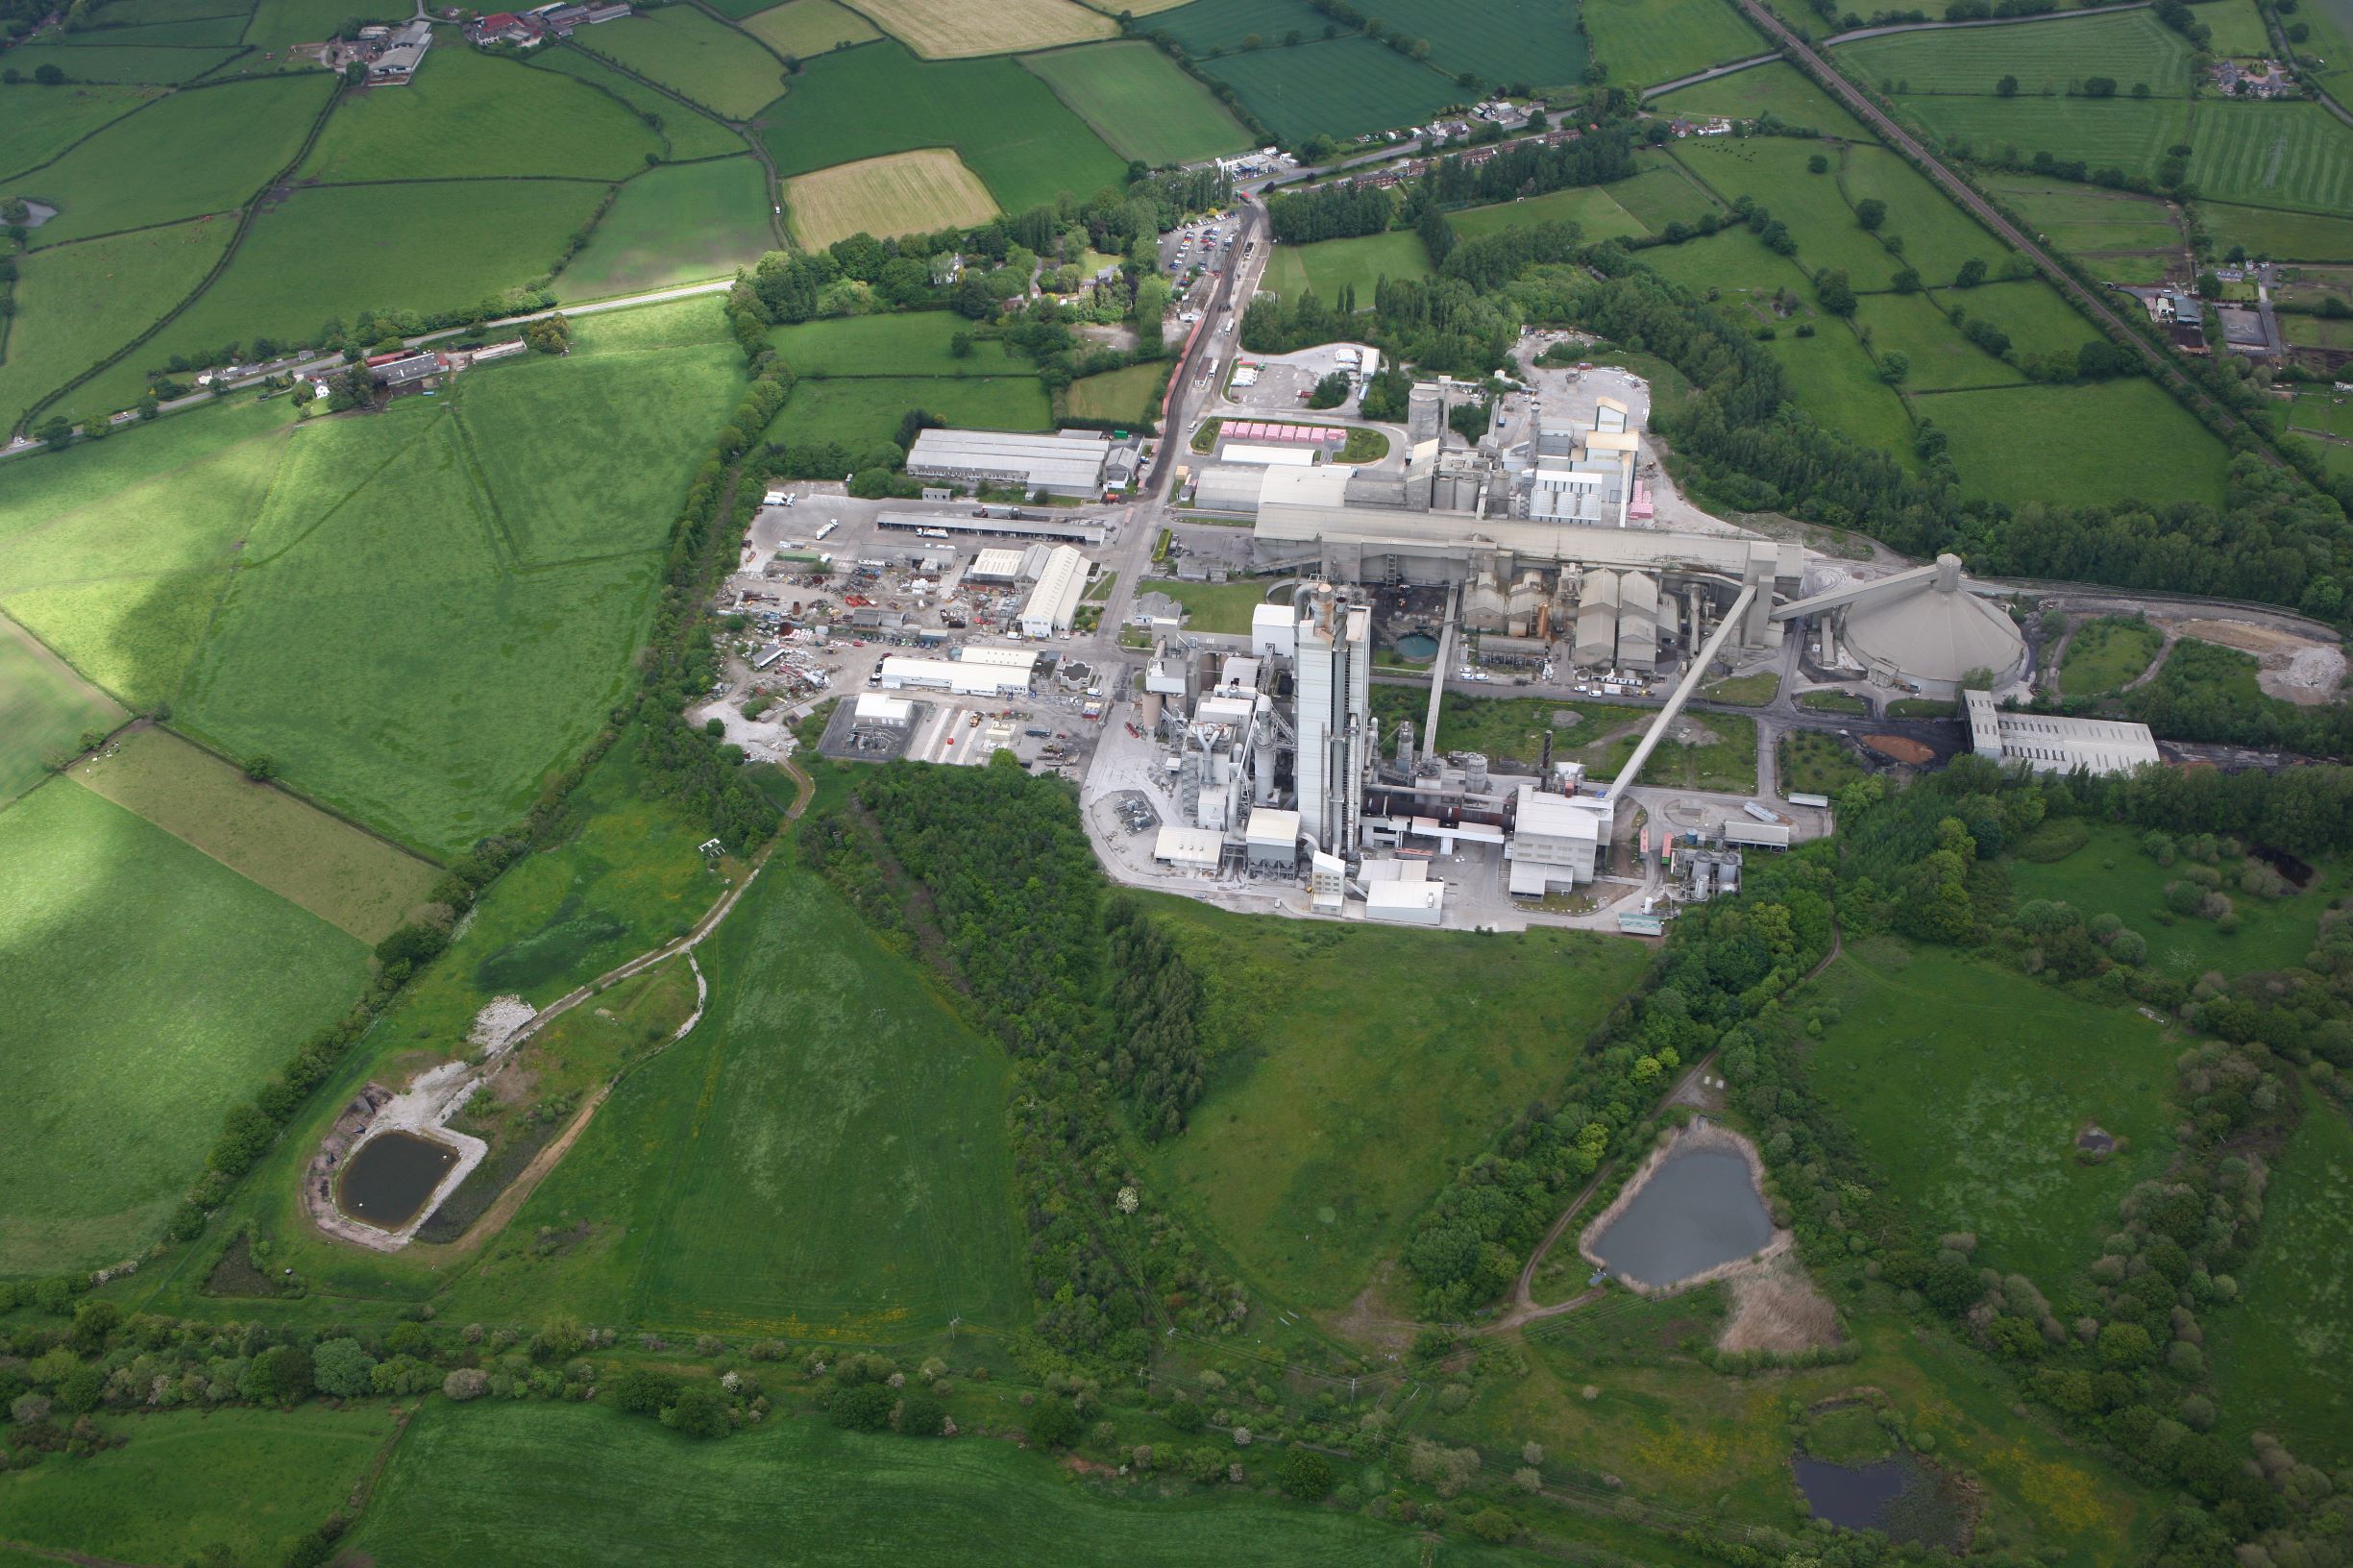 Hanson’s Padeswood cement works will decarbonise as part of the HyNet North West project